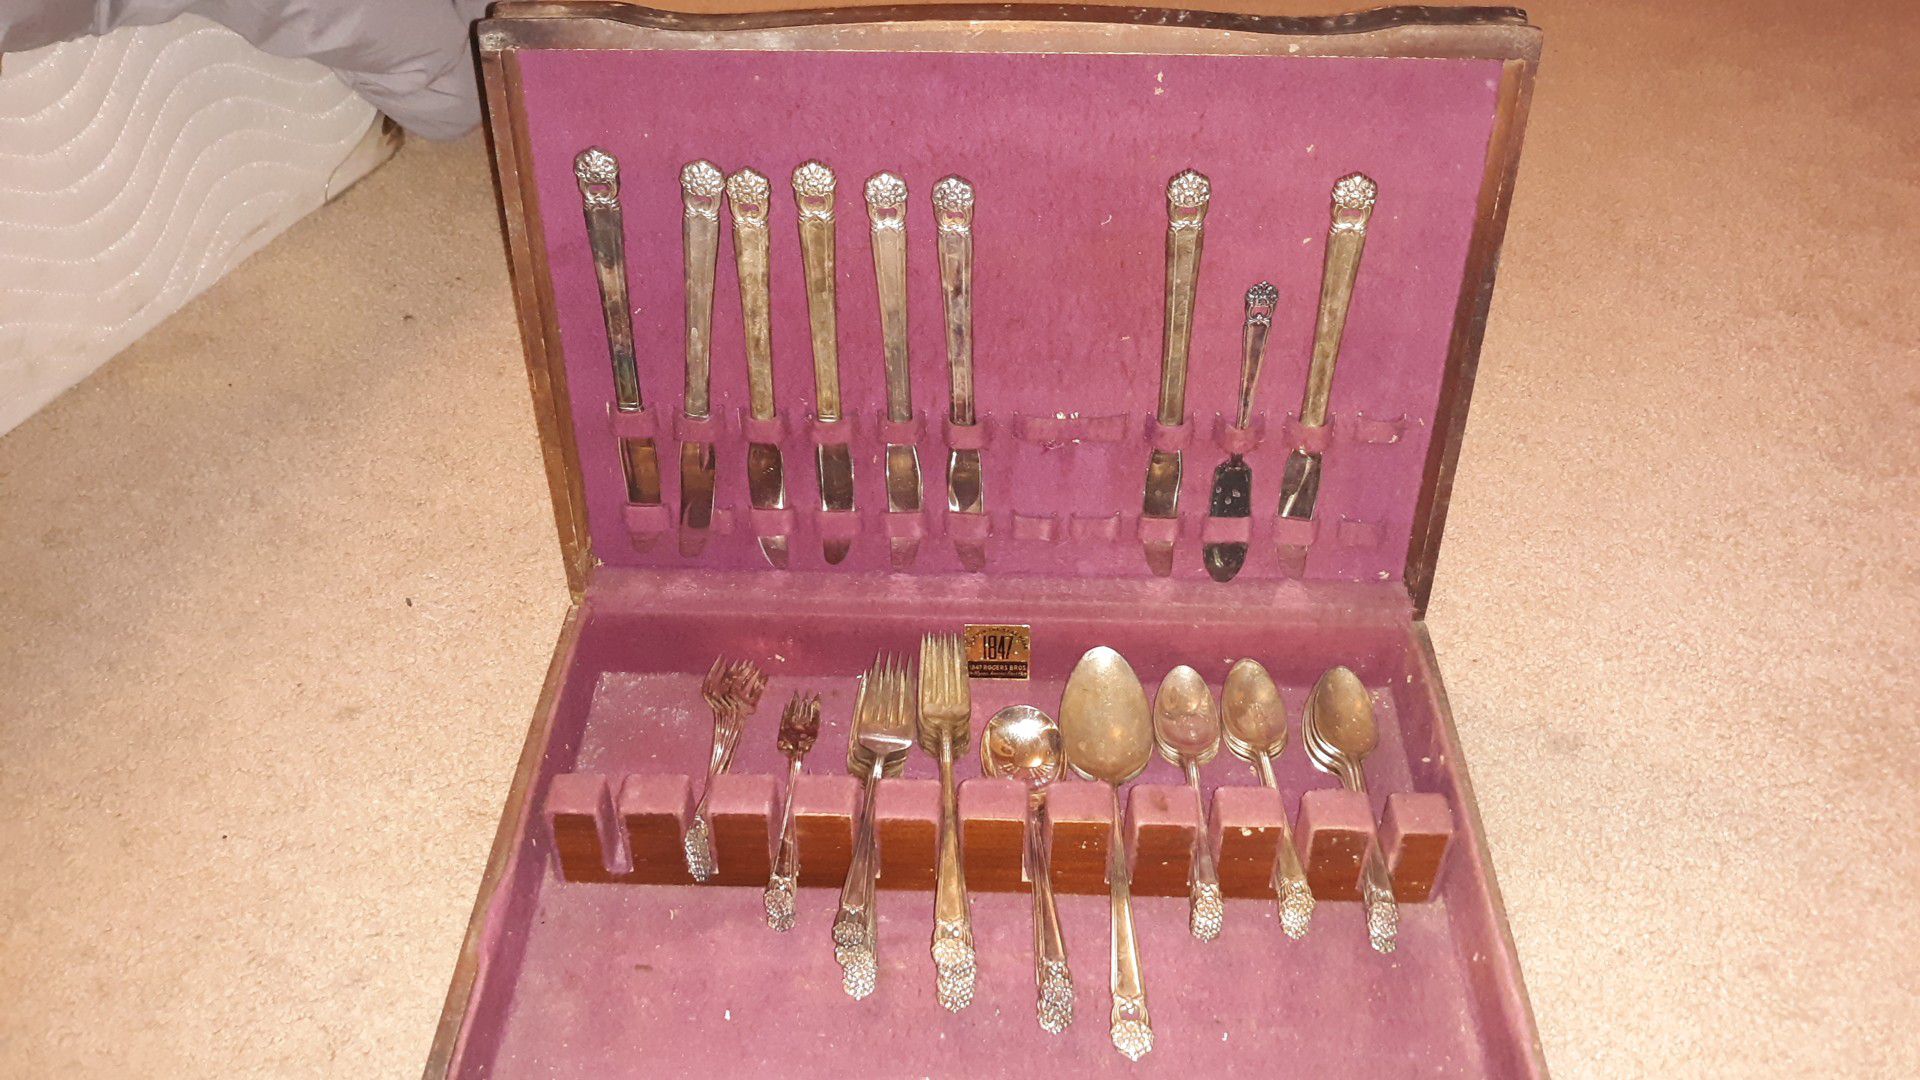 Solid silver silverware made in 1857